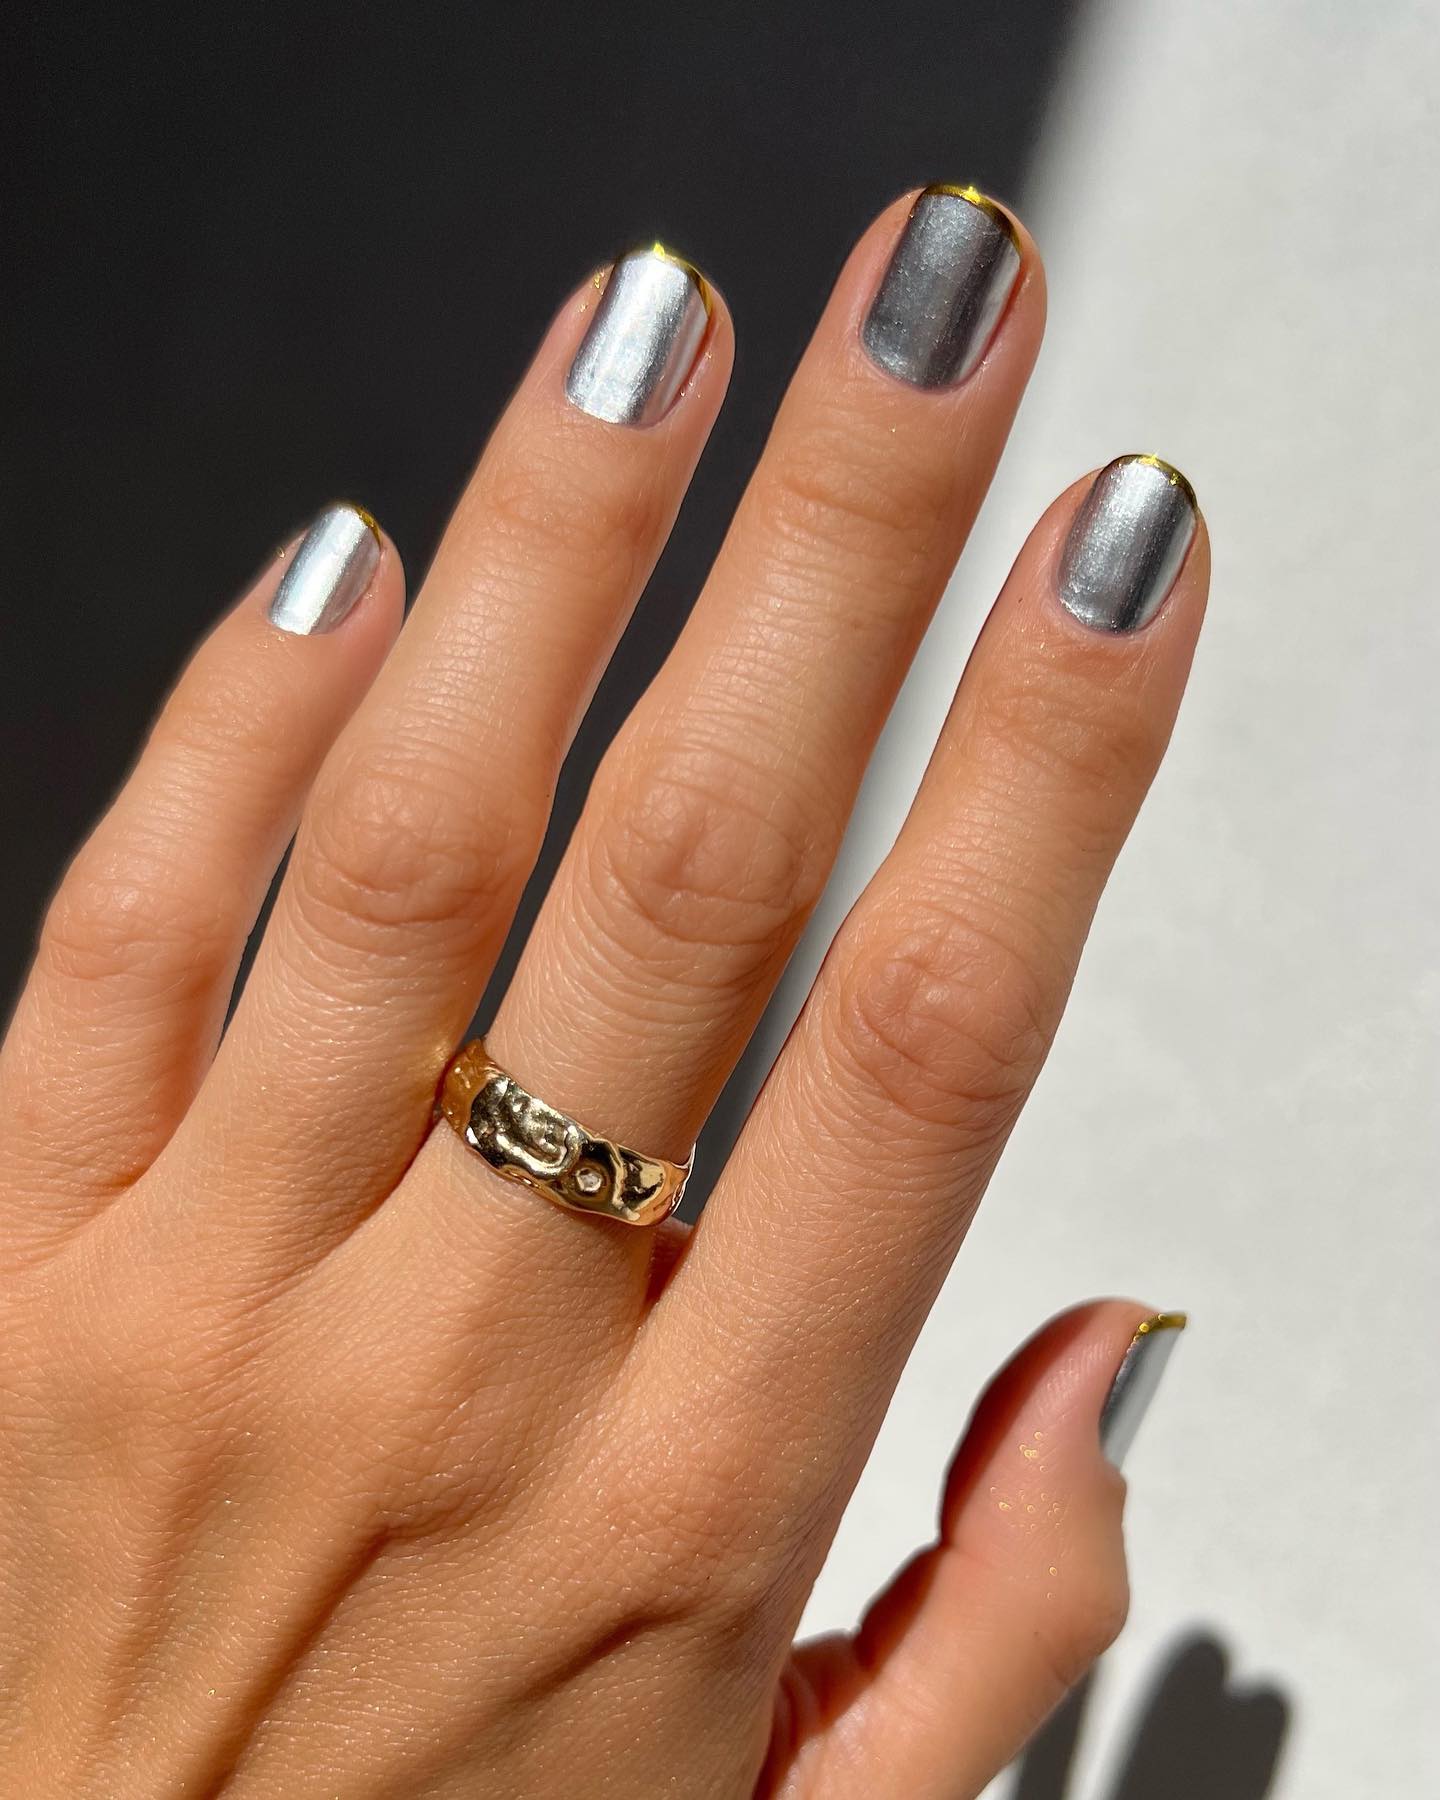 Winter Nail Trends 2022: Chrome